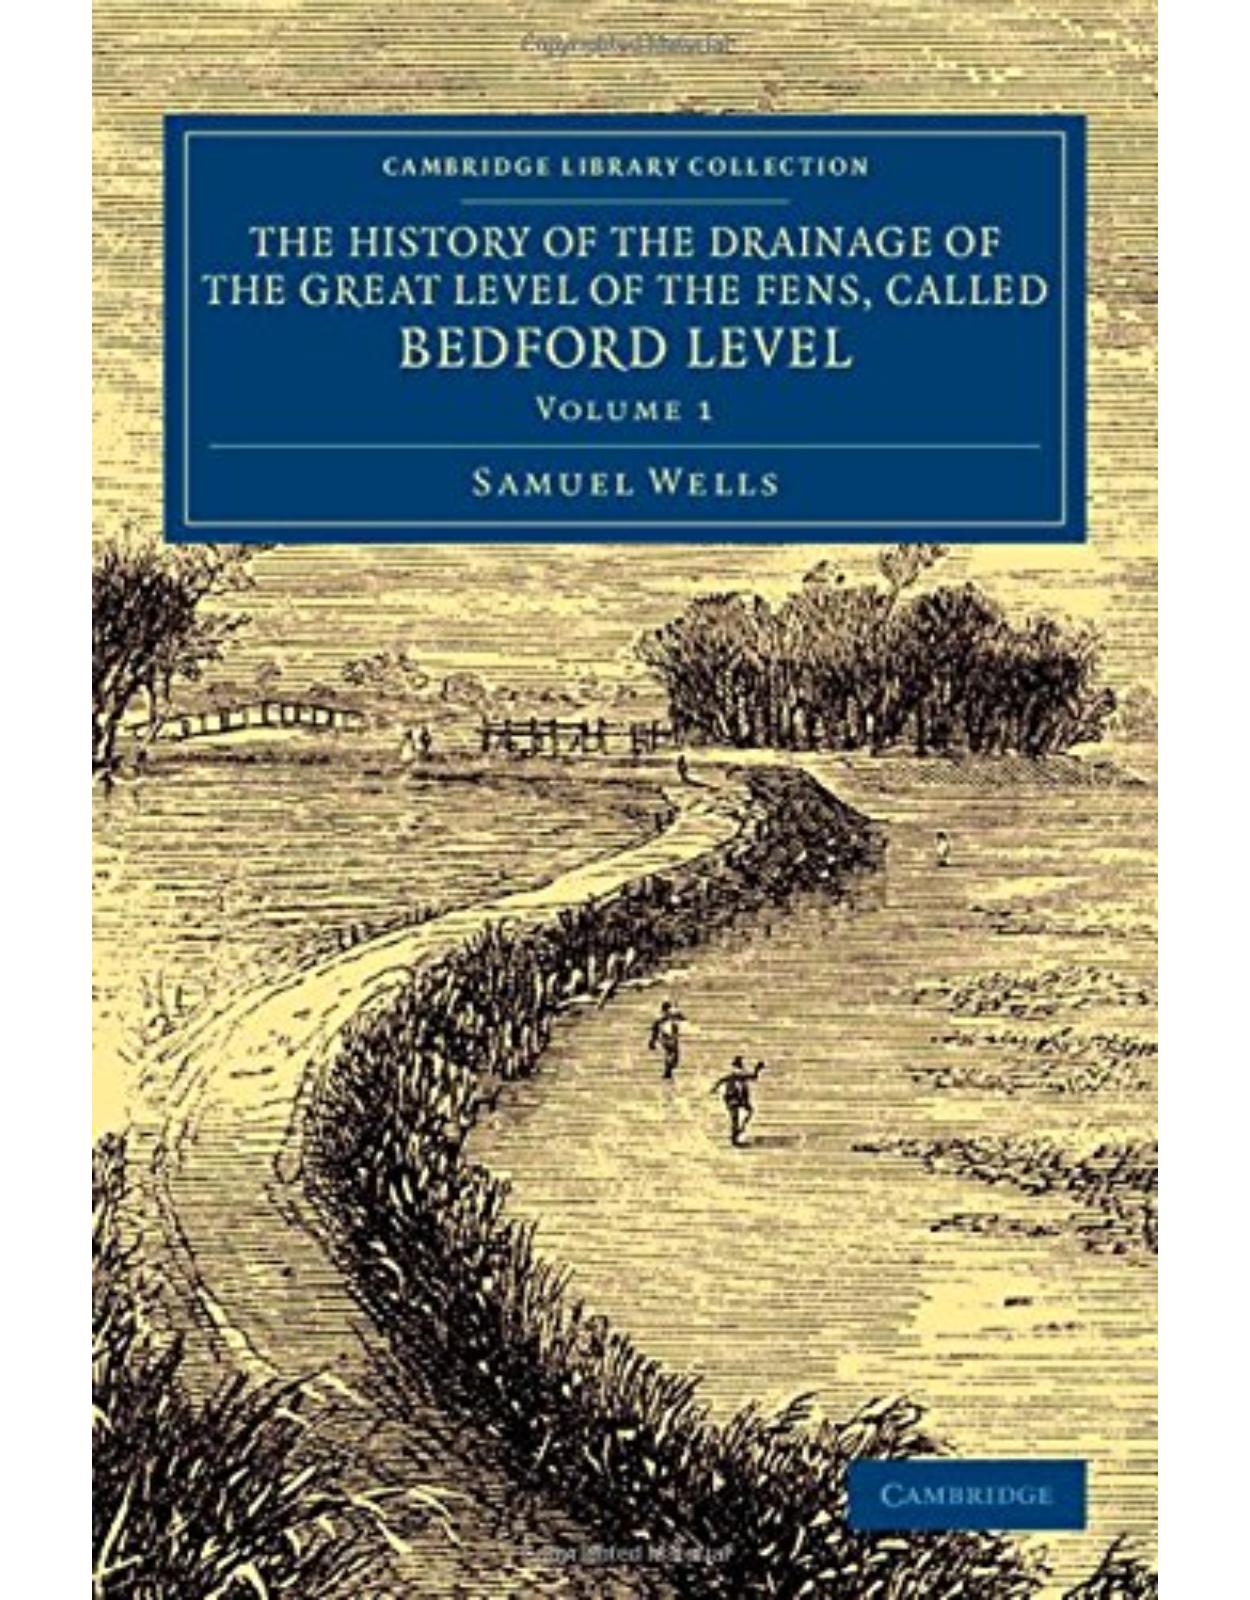 The History of the Drainage of the Great Level of the Fens, Called Bedford Level: With the Constitution and Laws of the Bedford Level Corporation (Volume 1)